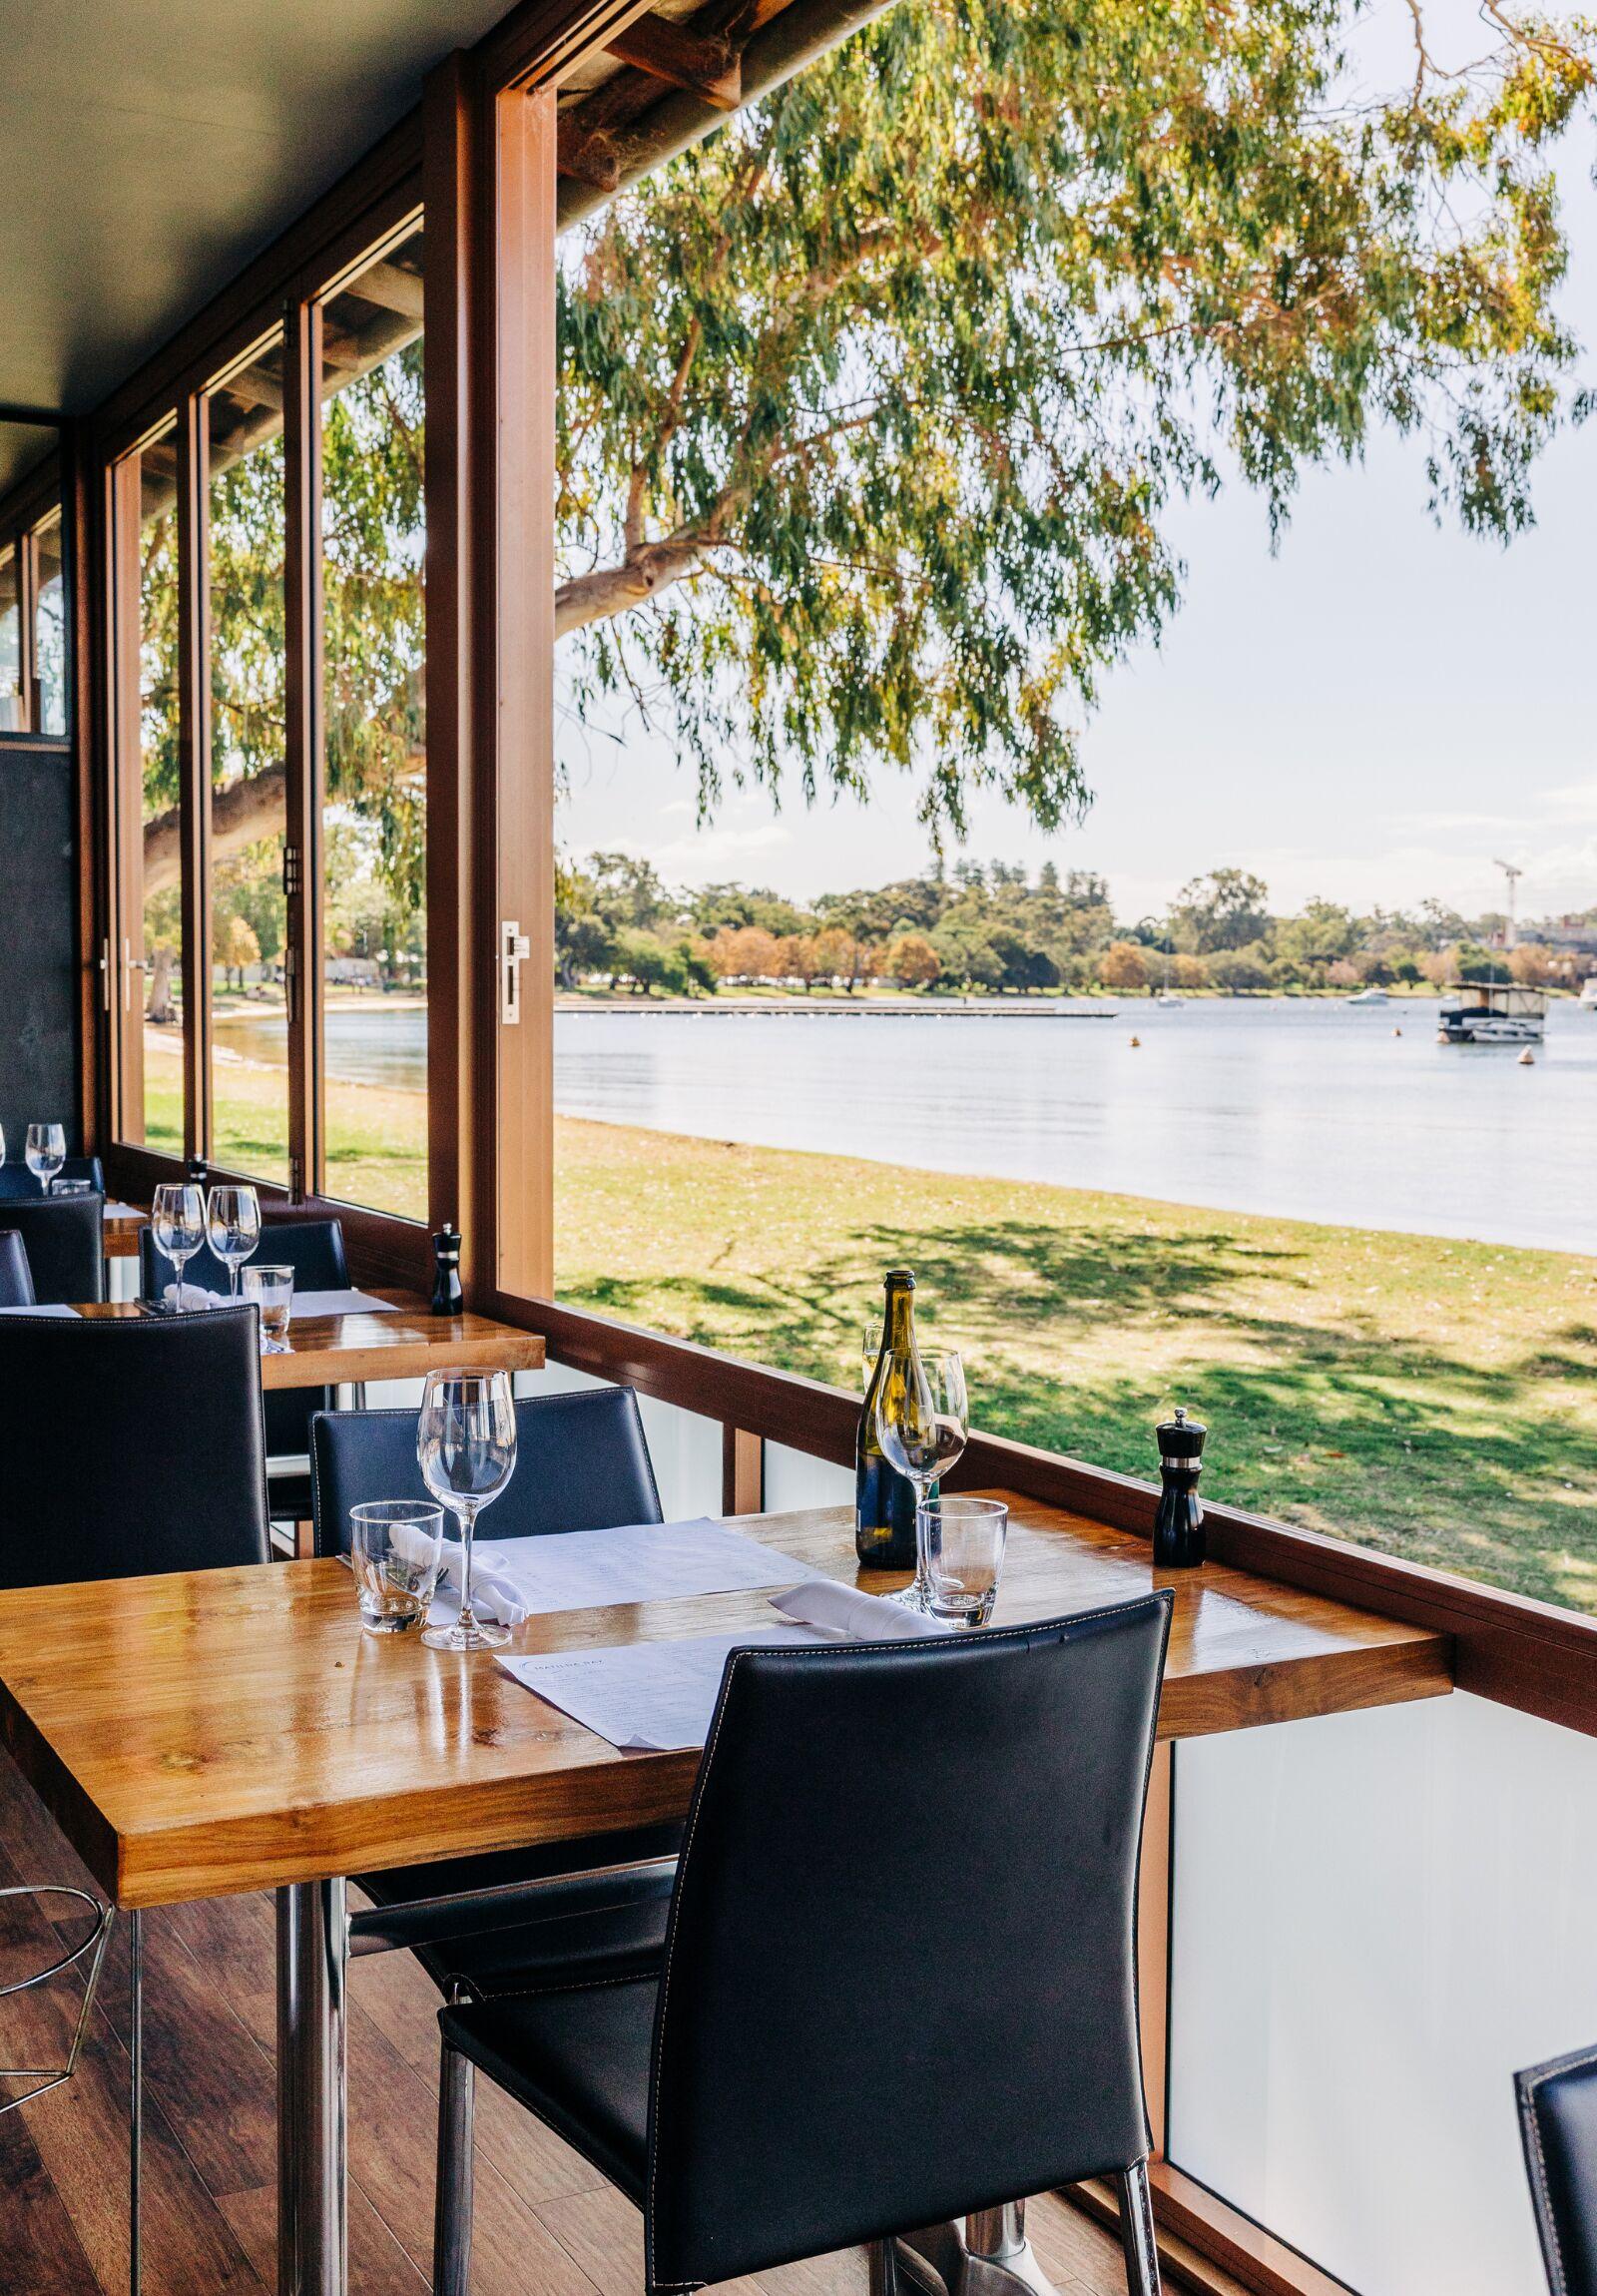 PERCHED RIGHT ON THE EDGE OF THE SWAN RIVER, MATILDA BAY RESTAURANT HAS LONG BEEN A FAVOURITE FOR SPECIAL OCCASIONS AND LAZY LUNCHES.